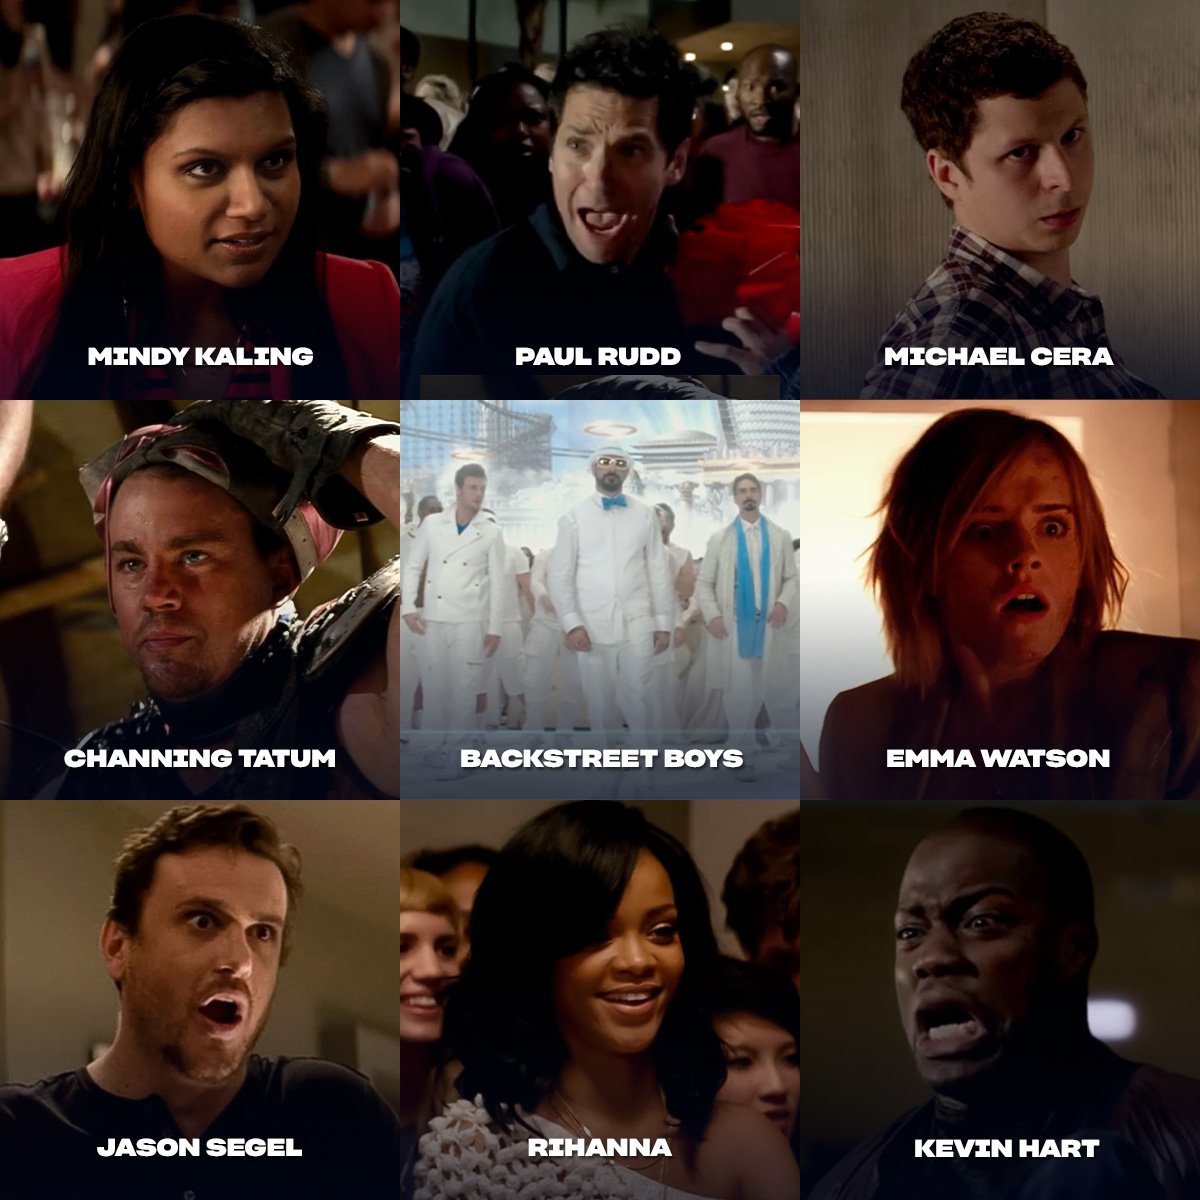 Name a celebrity who doesn't cameo in #ThisIsTheEnd.